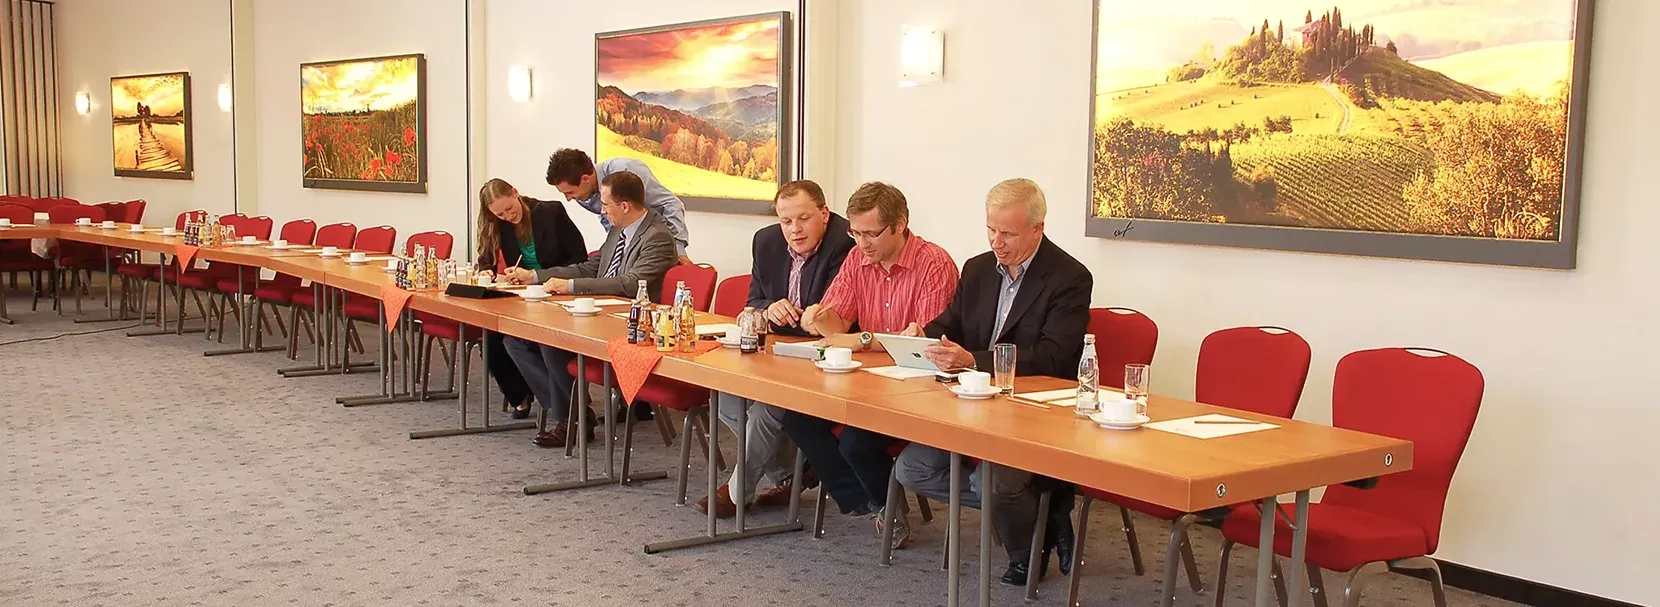 Organise conferences and seminars at the Landhotel Behre near Hanover